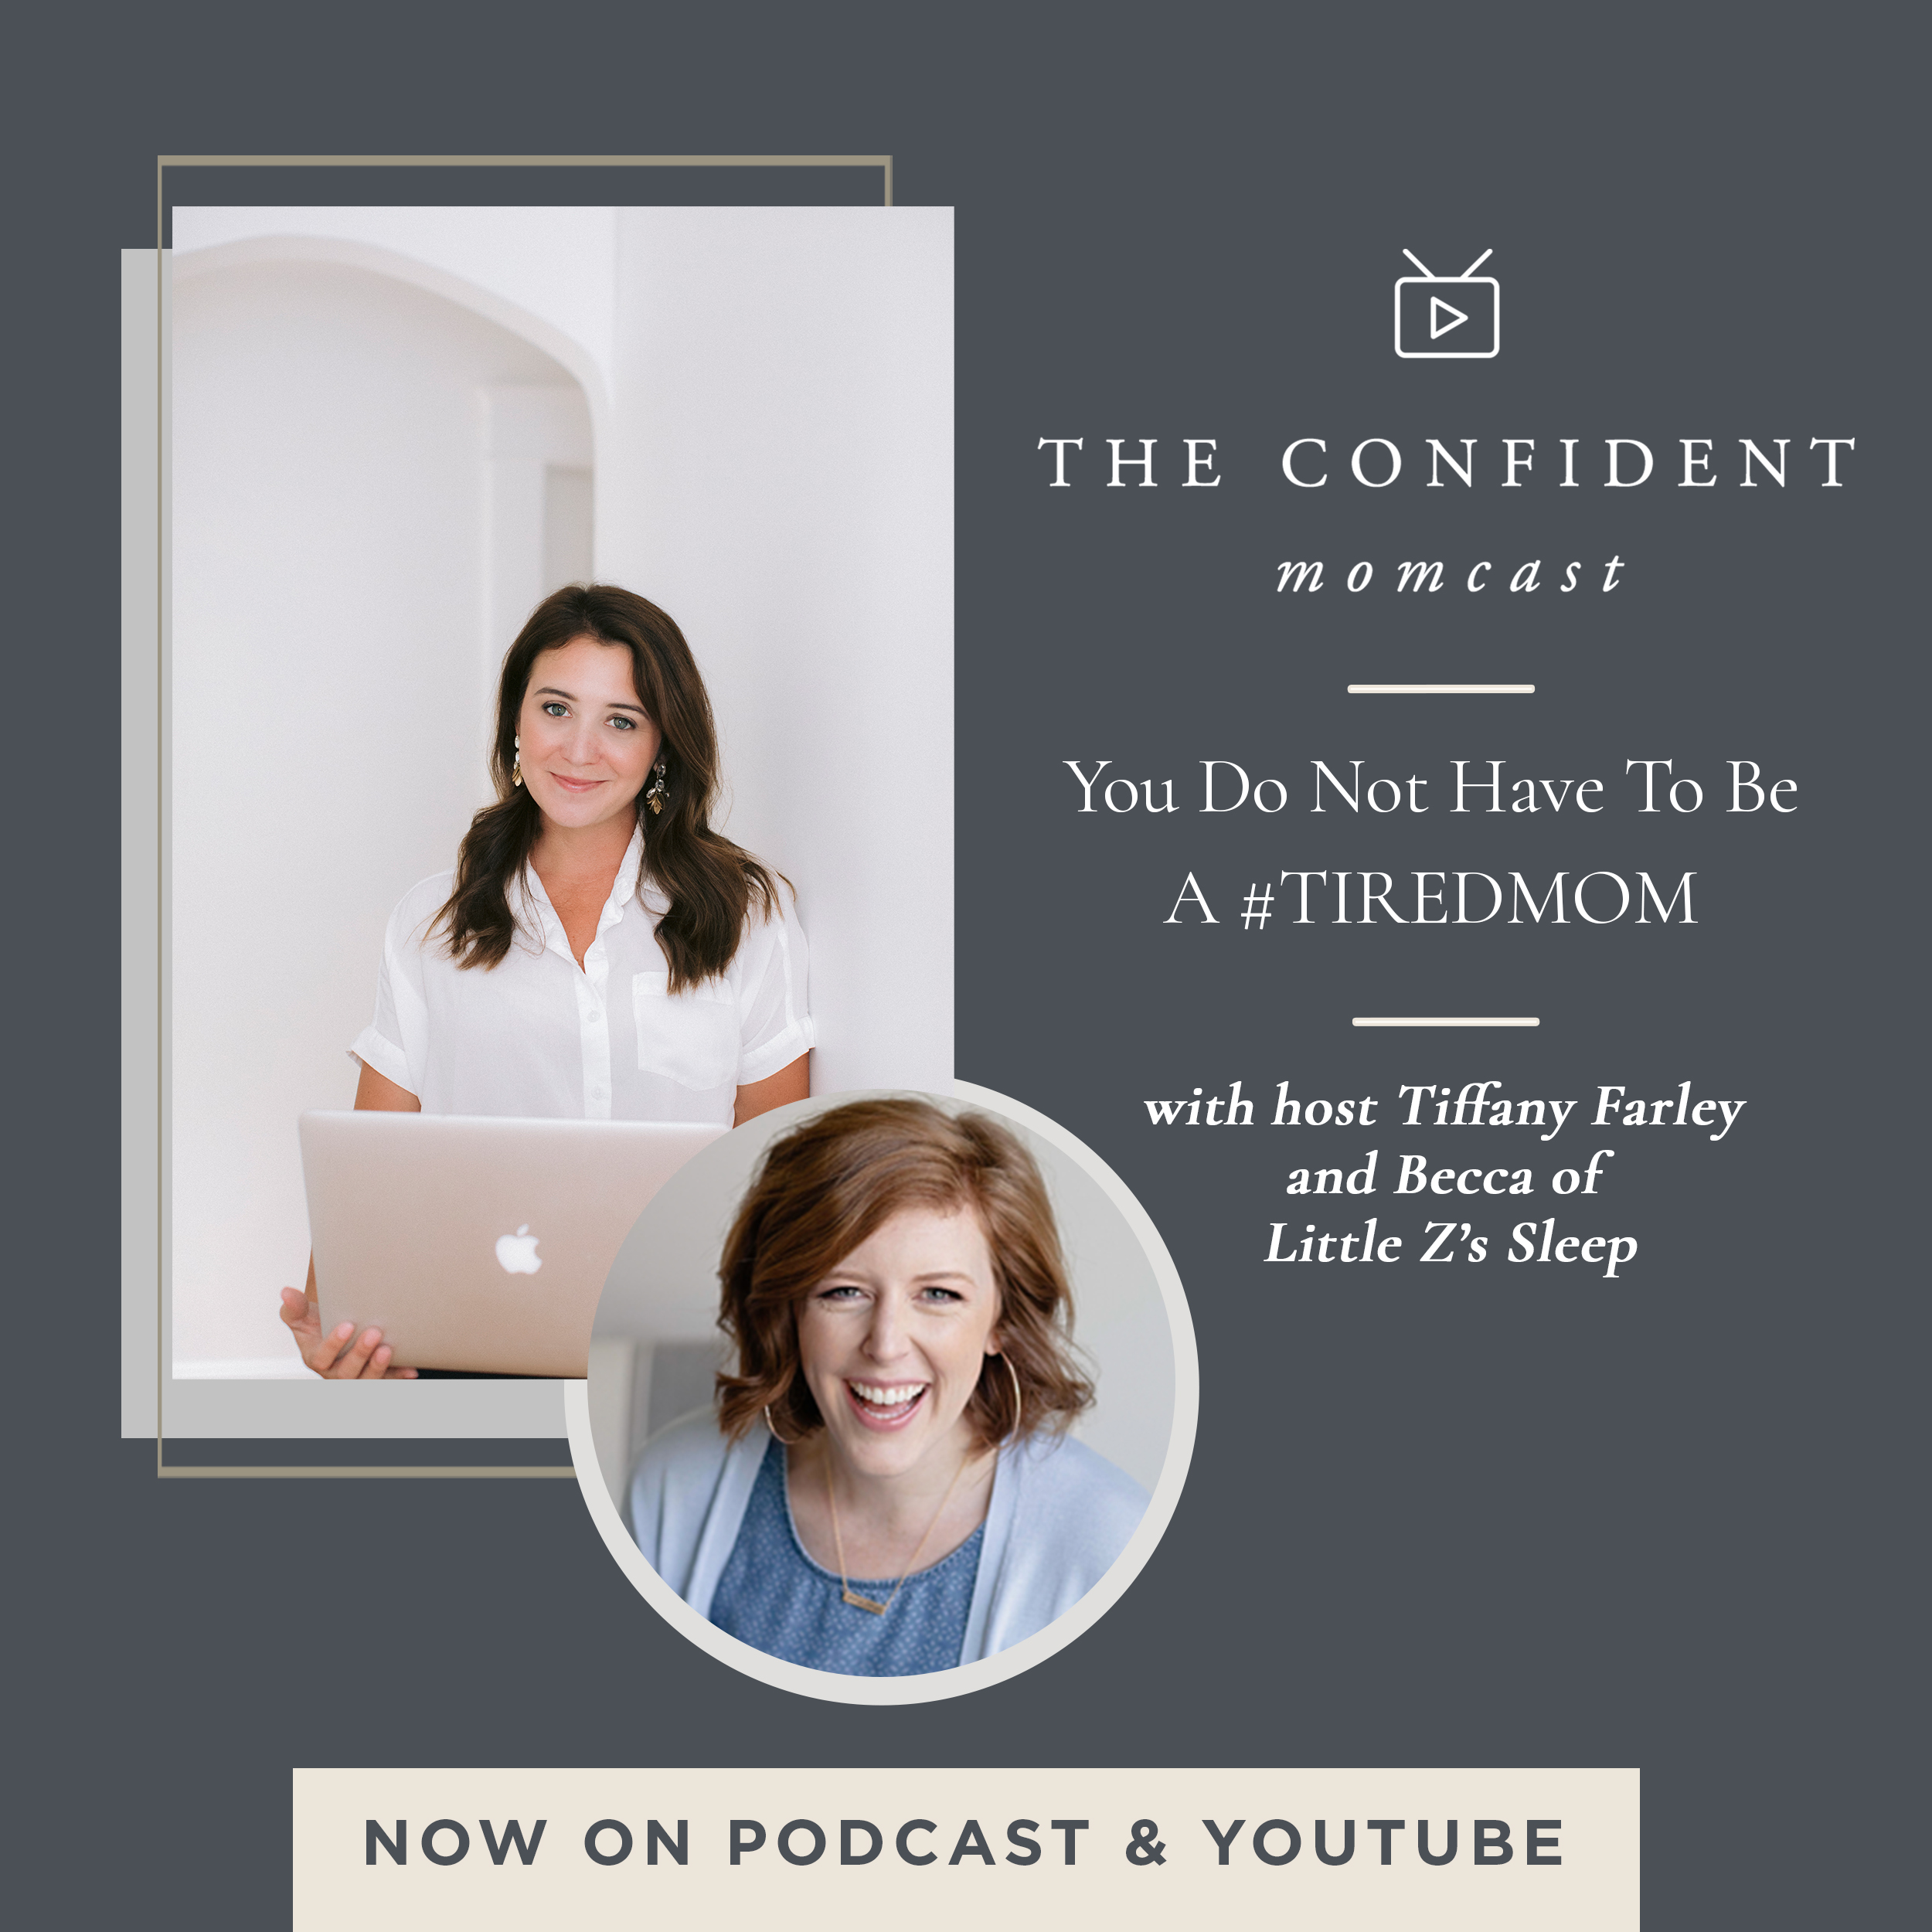 Learn about newborn and baby sleep training with Becca of Little Z's Sleep on The Confident Momcast with Tiffany Farley